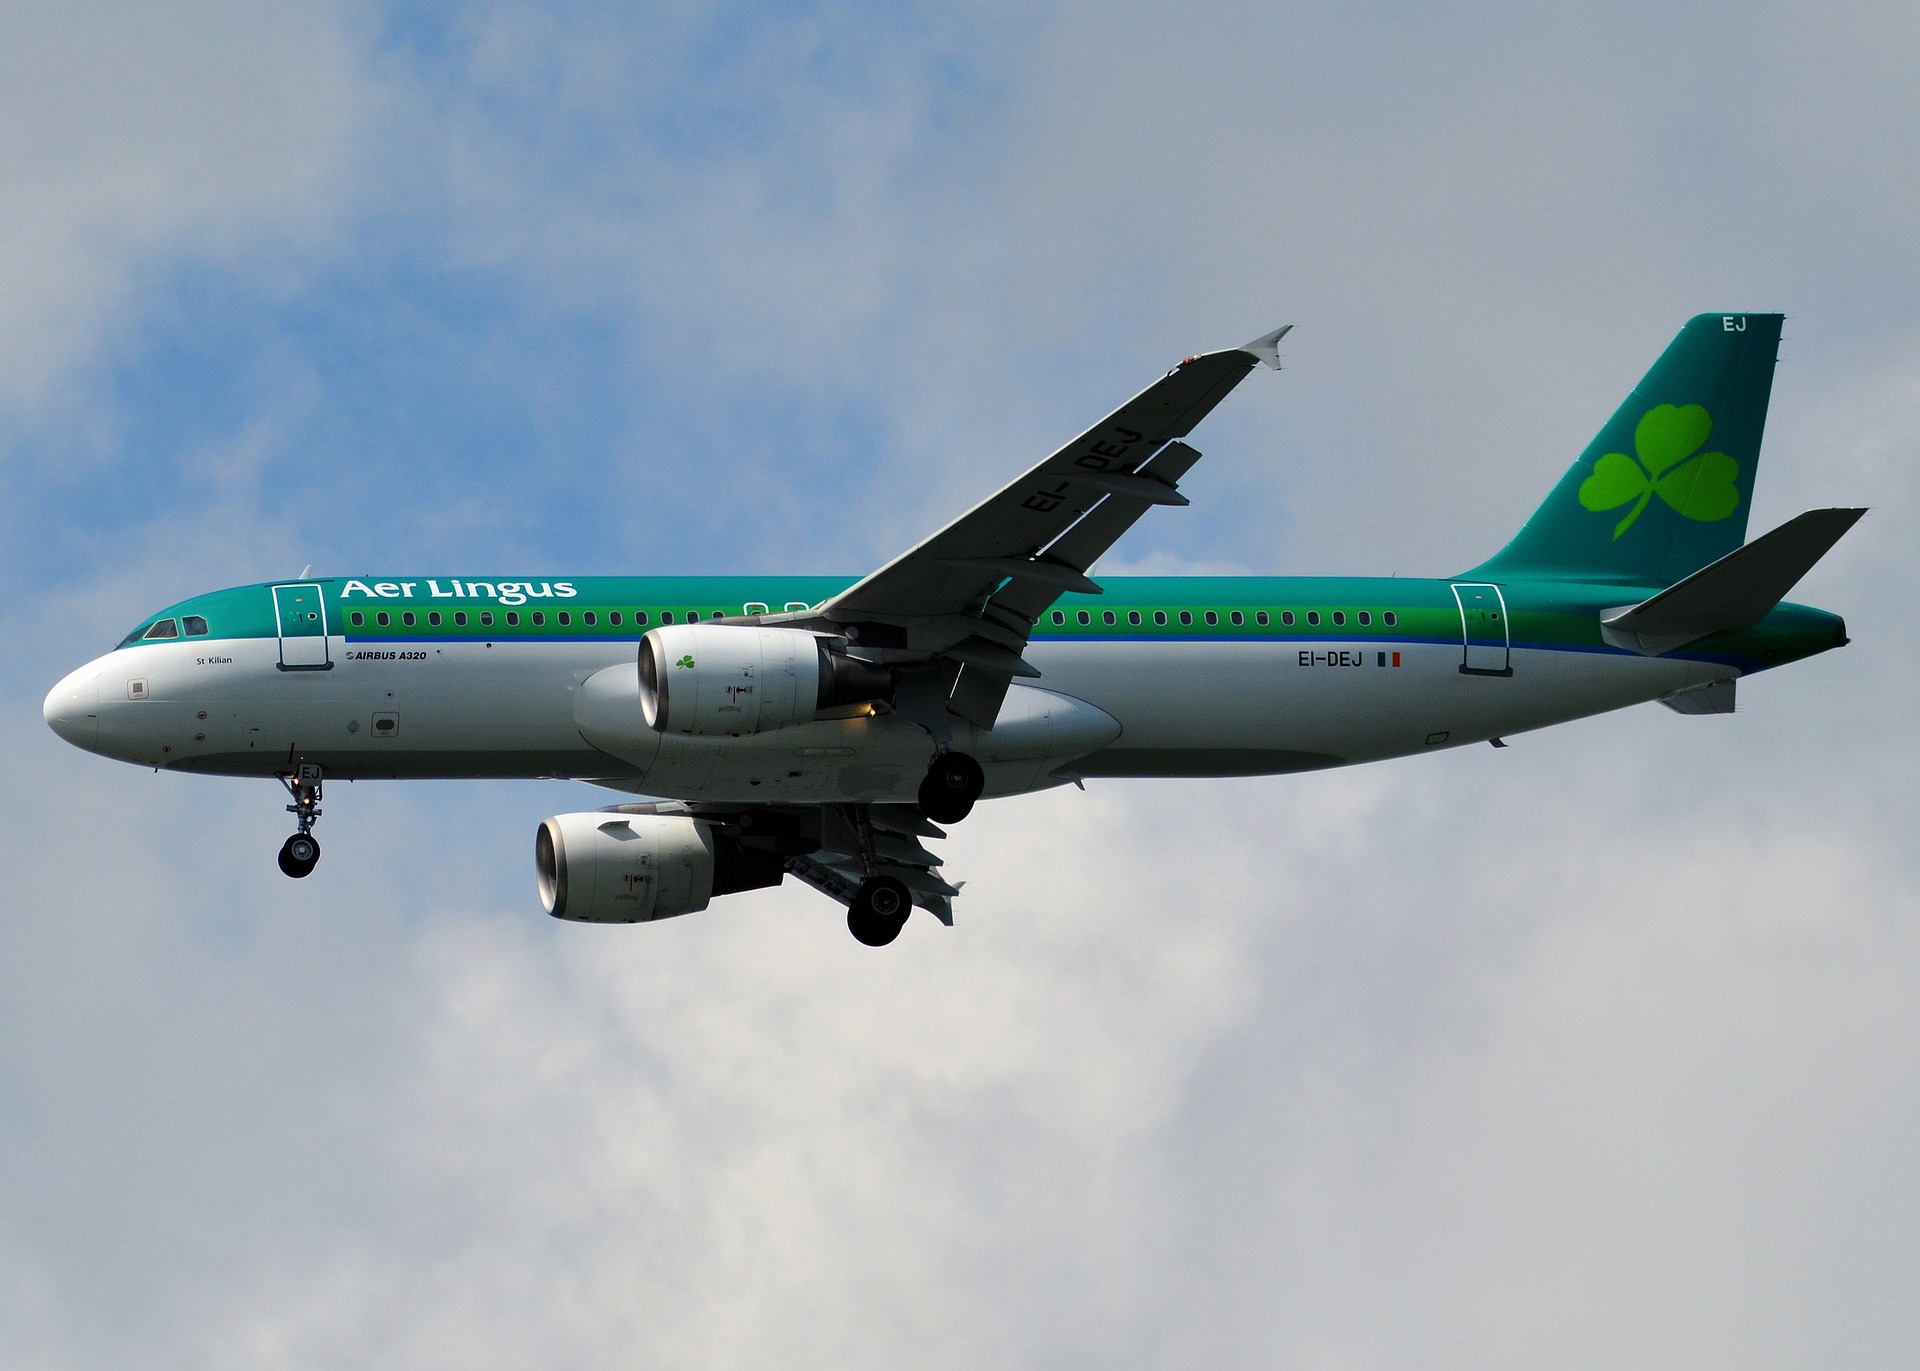 These American TV hosts think Lingus (as in, Aer Lingus 